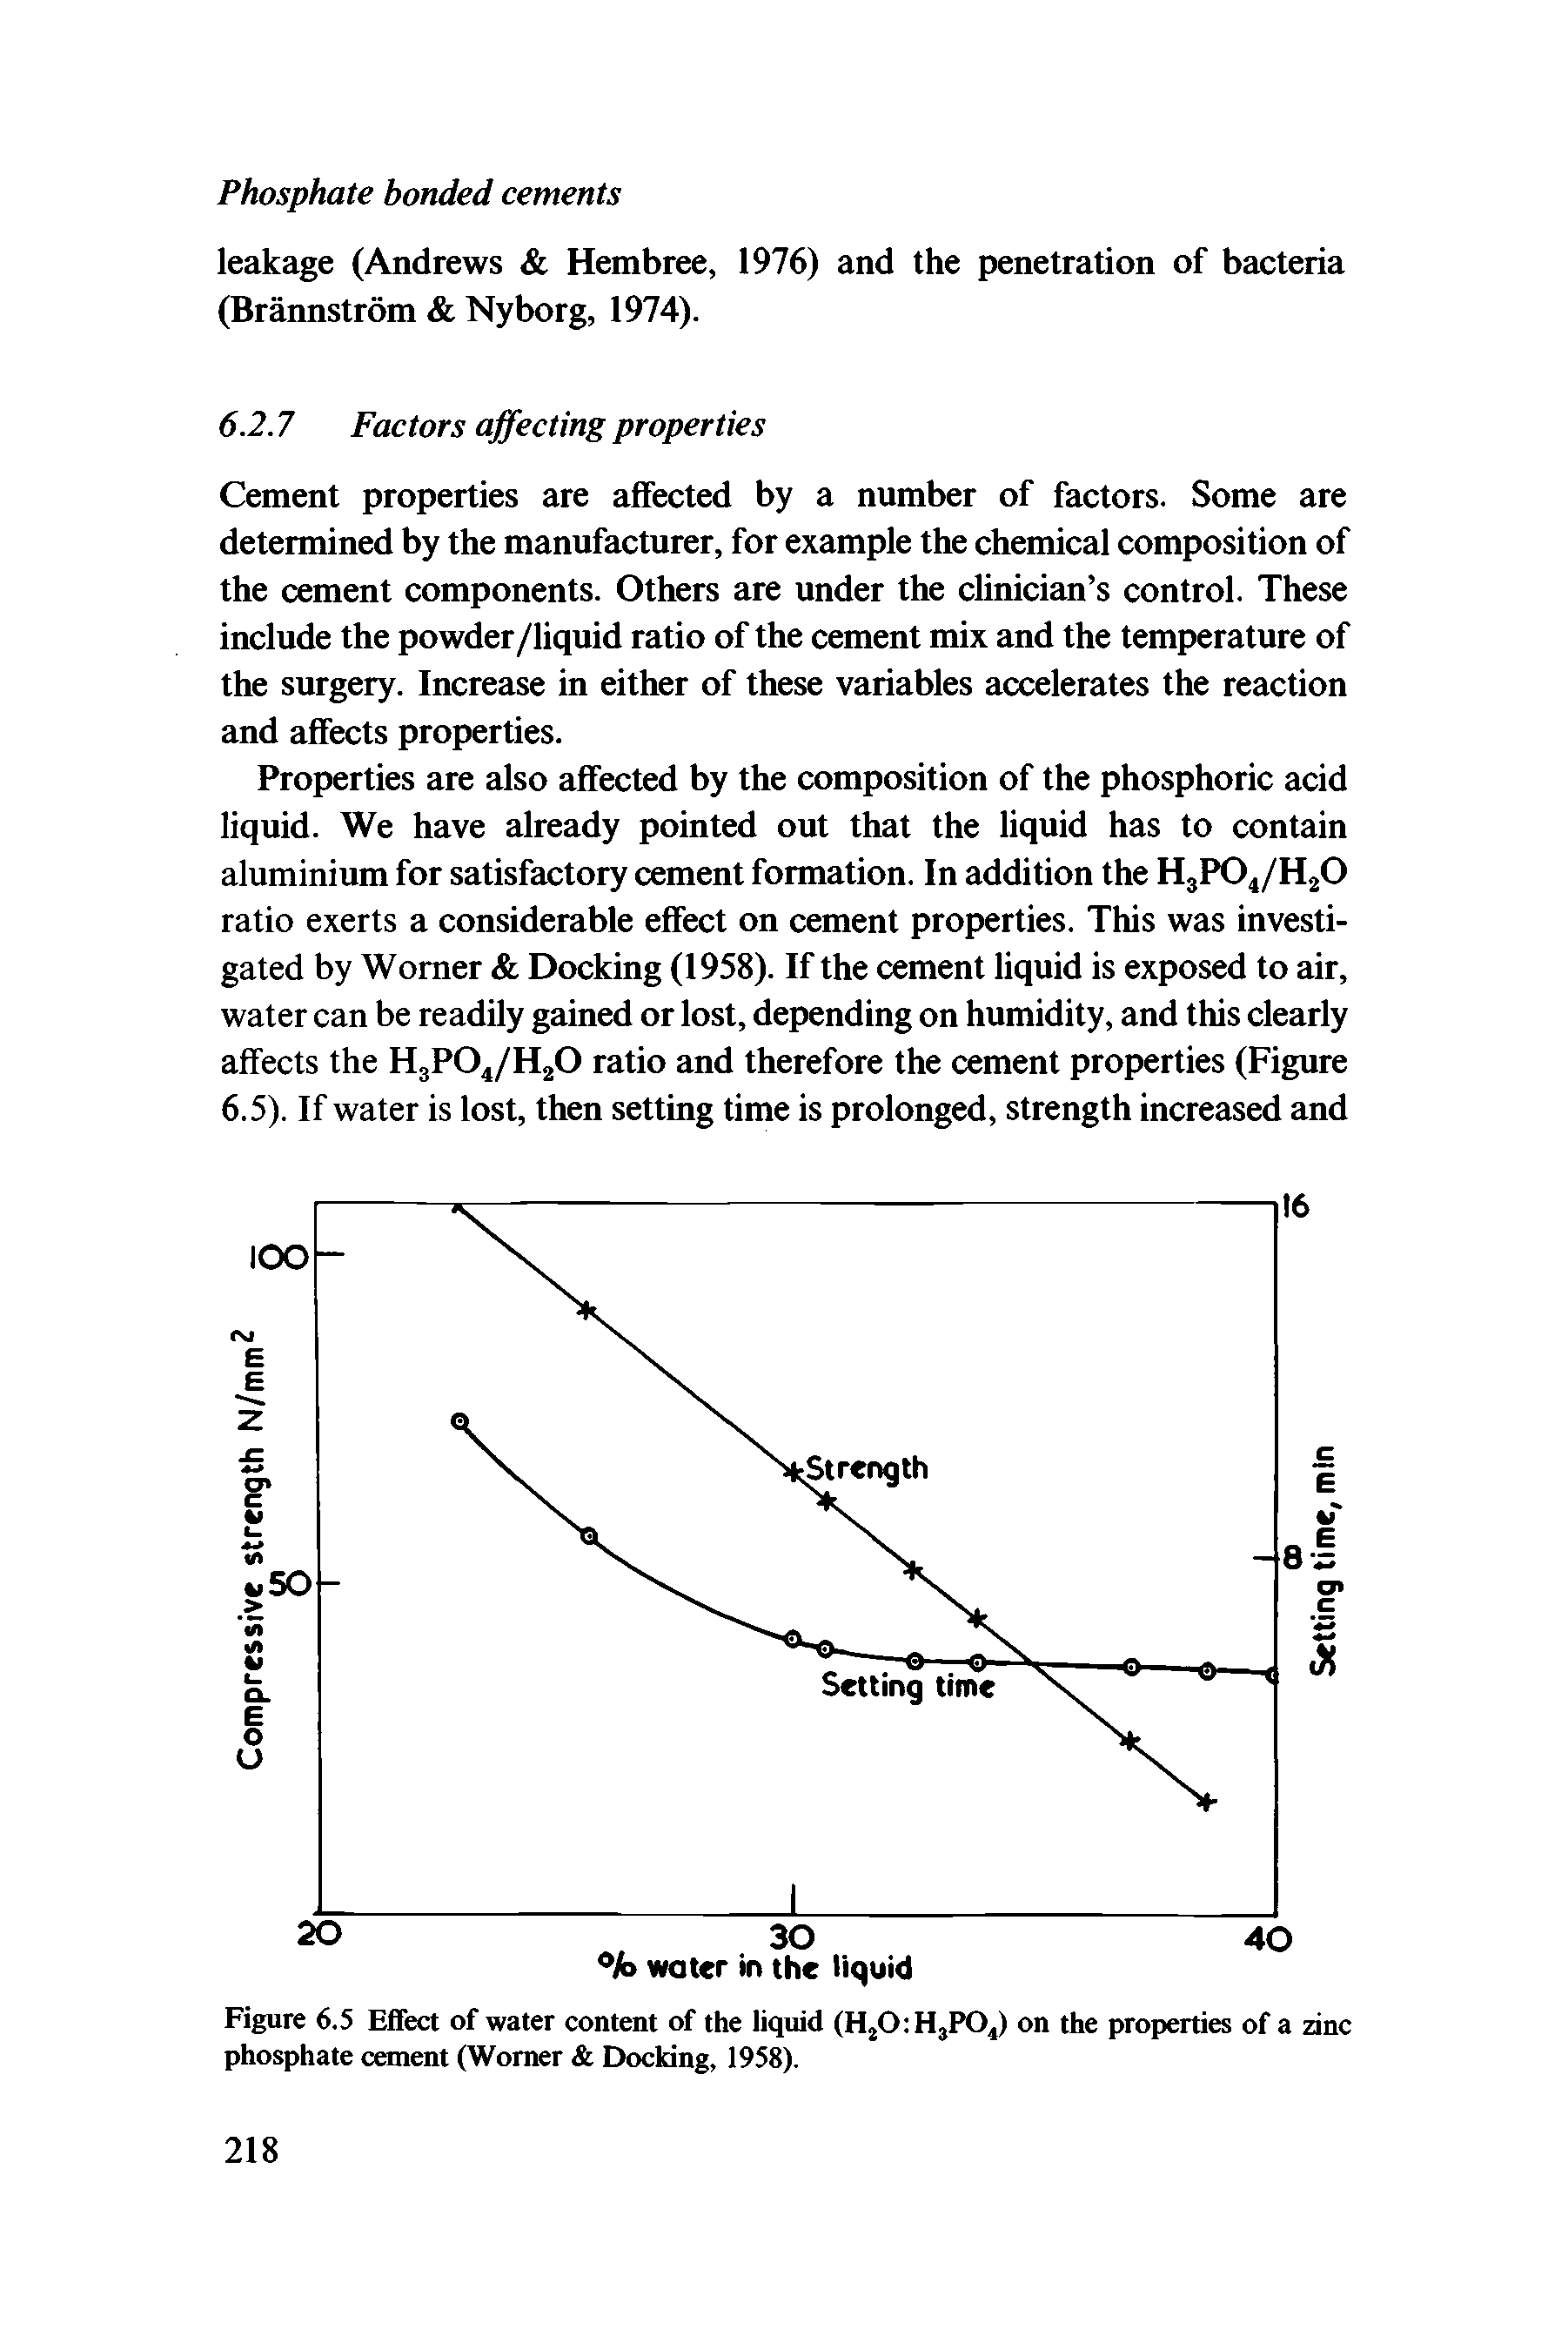 Figure 6.5 Effect of water content of the liquid (Hj0 HjP04) on the properties of a zinc phosphate cement (Womer Docking, 1958).